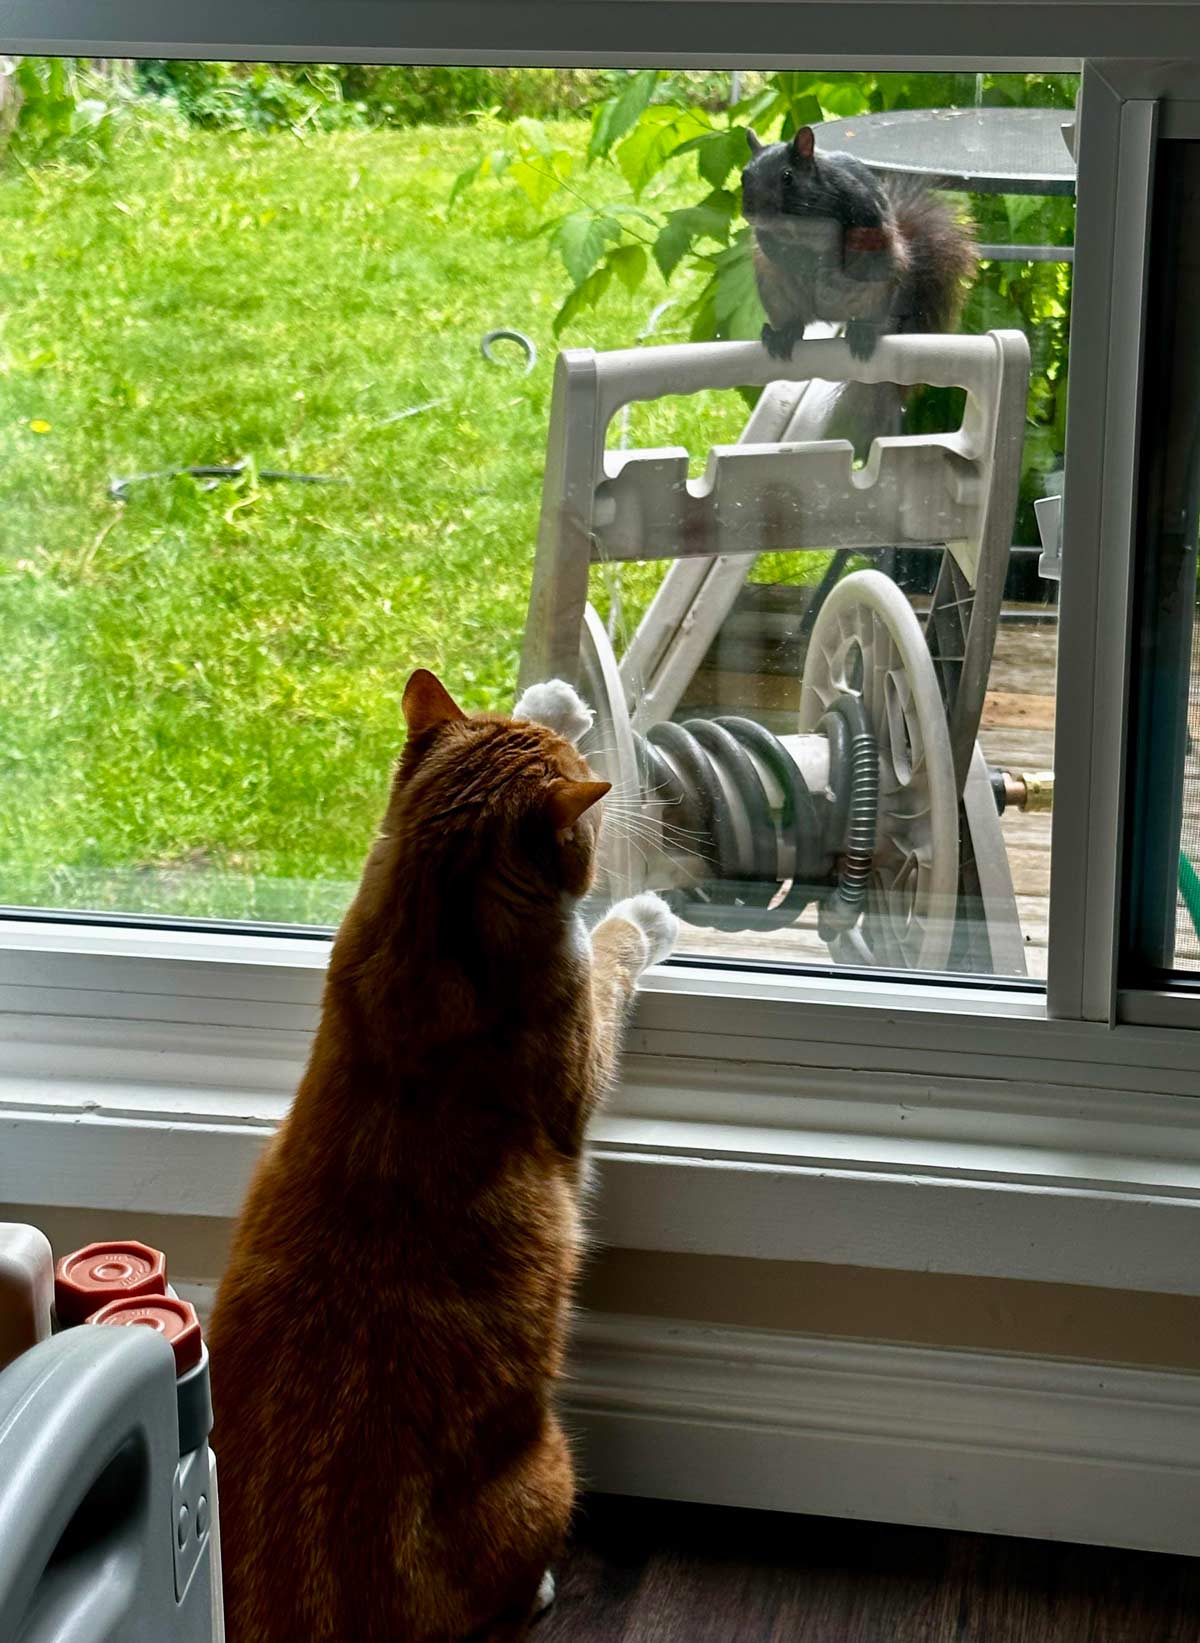 This squirrel likes to terrorize my cat every day